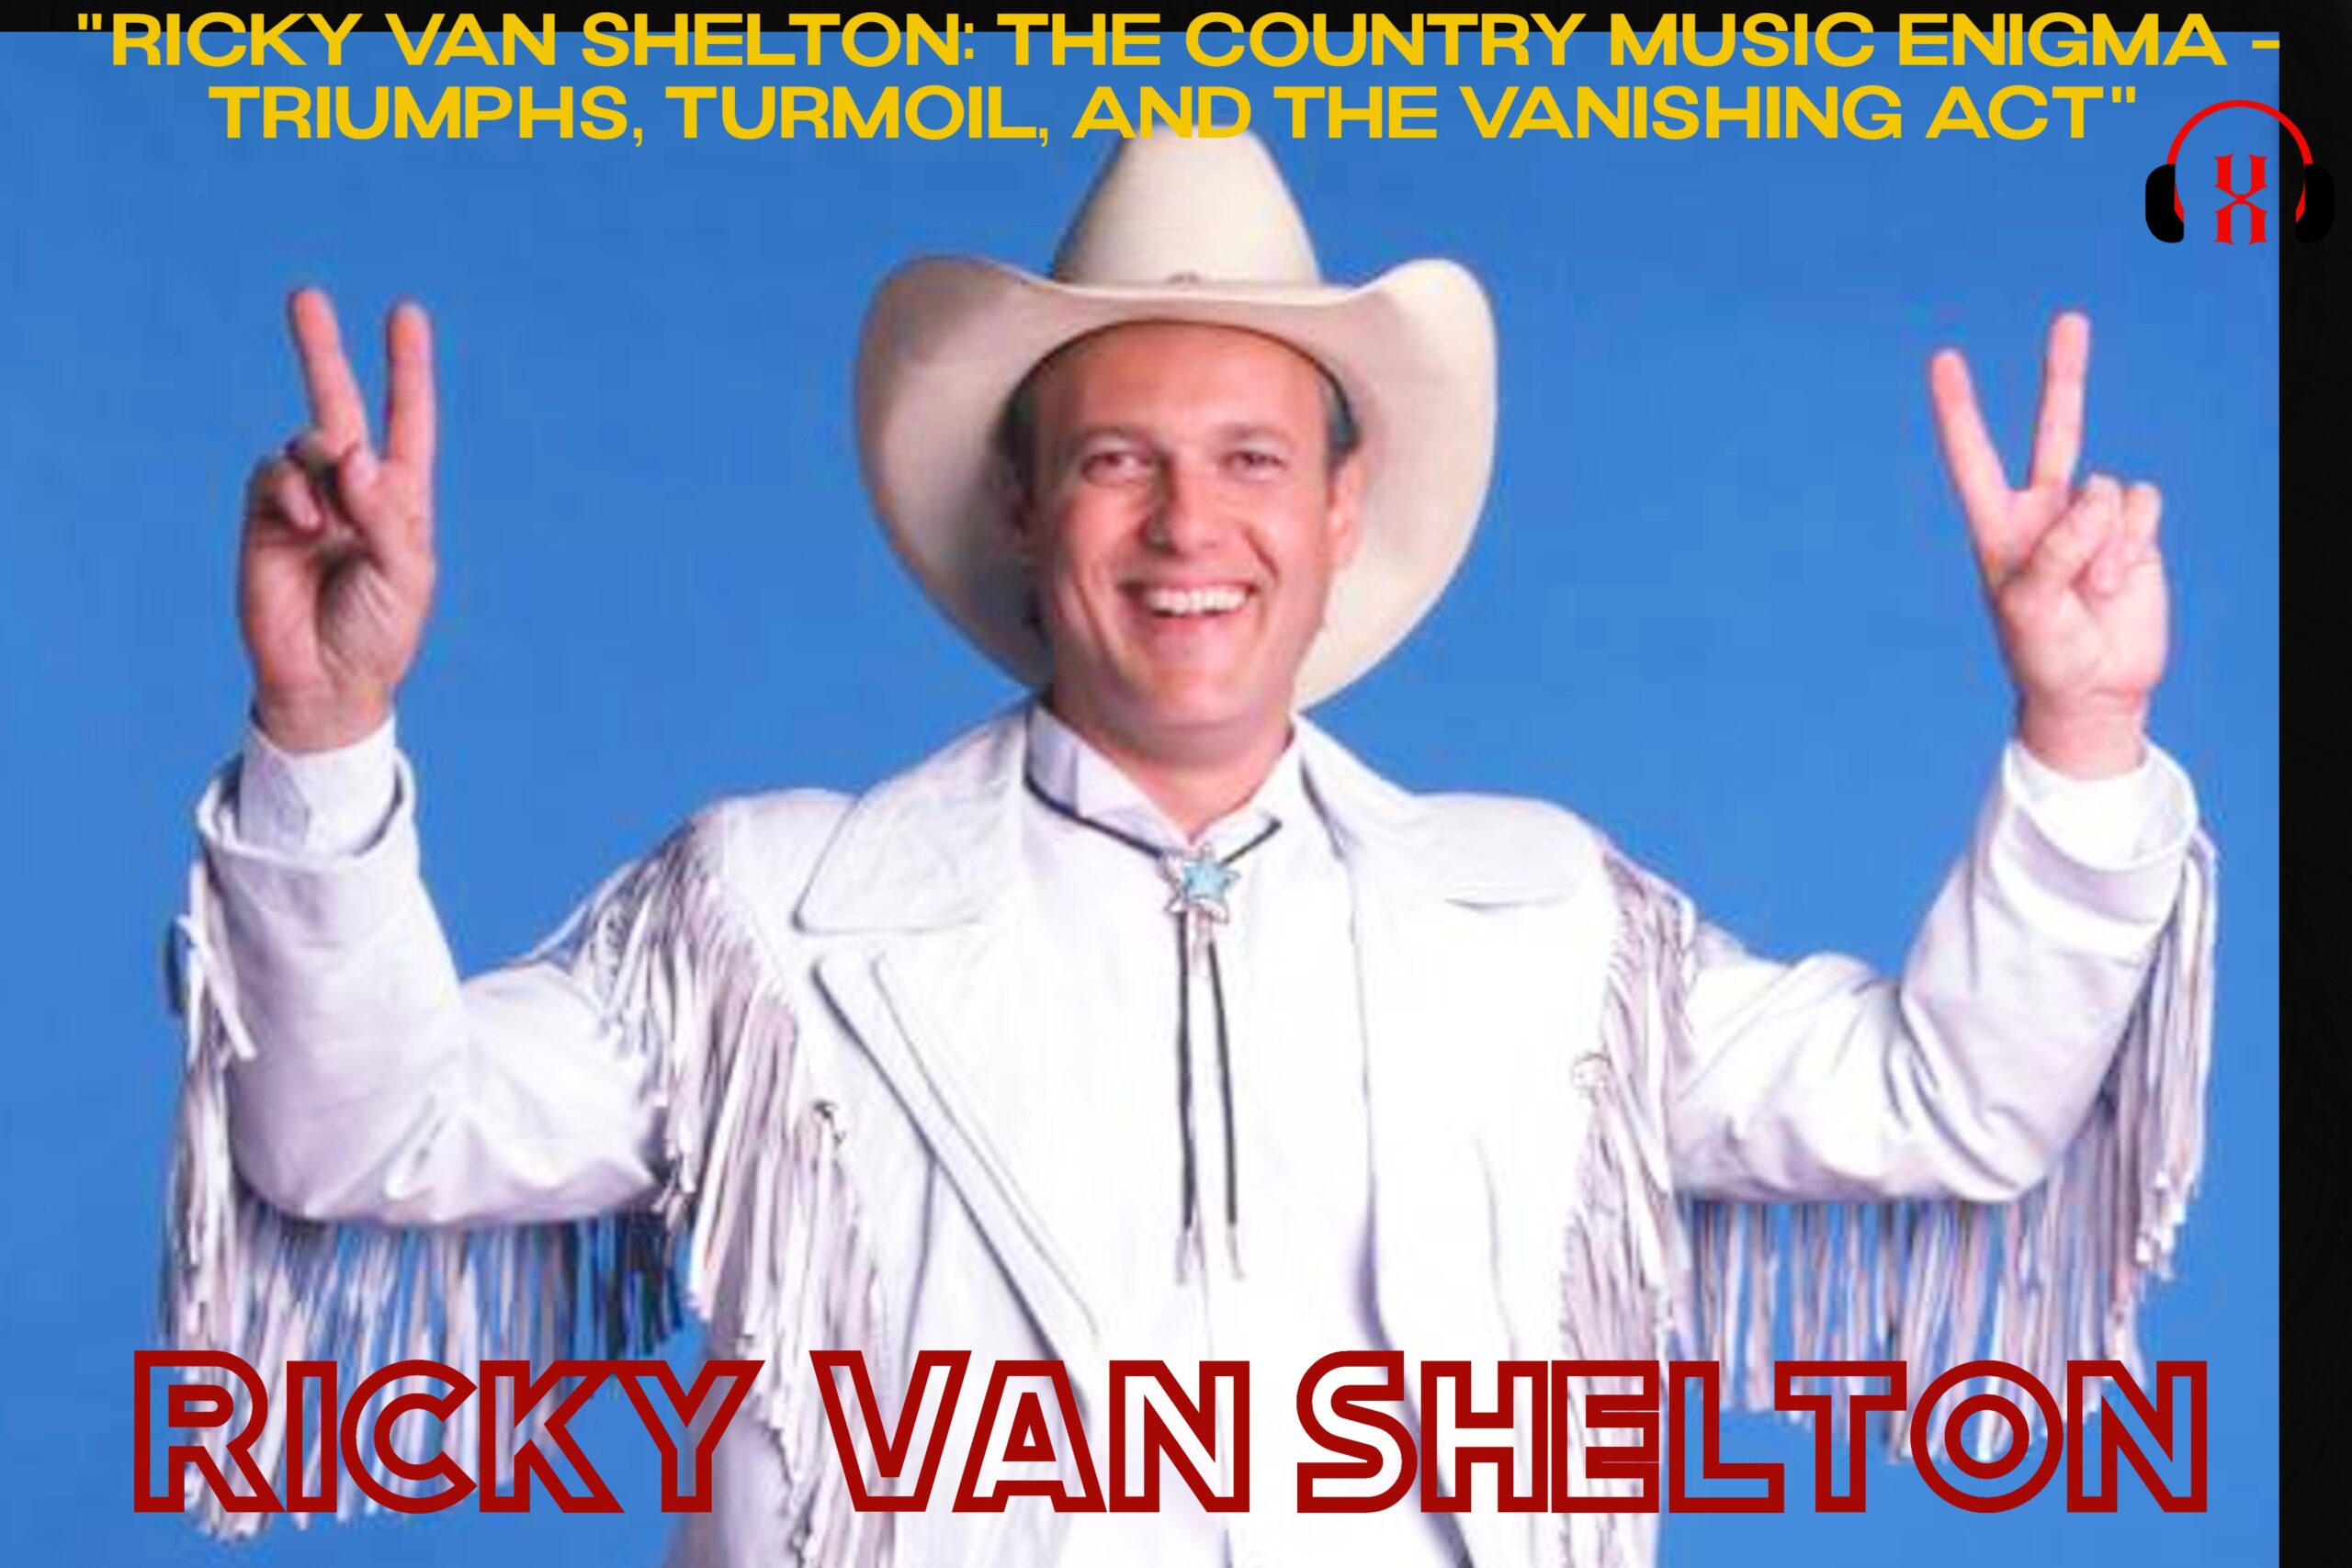 "Ricky Van Shelton: The Country Music Enigma - Triumphs, Turmoil, and the Vanishing Act"